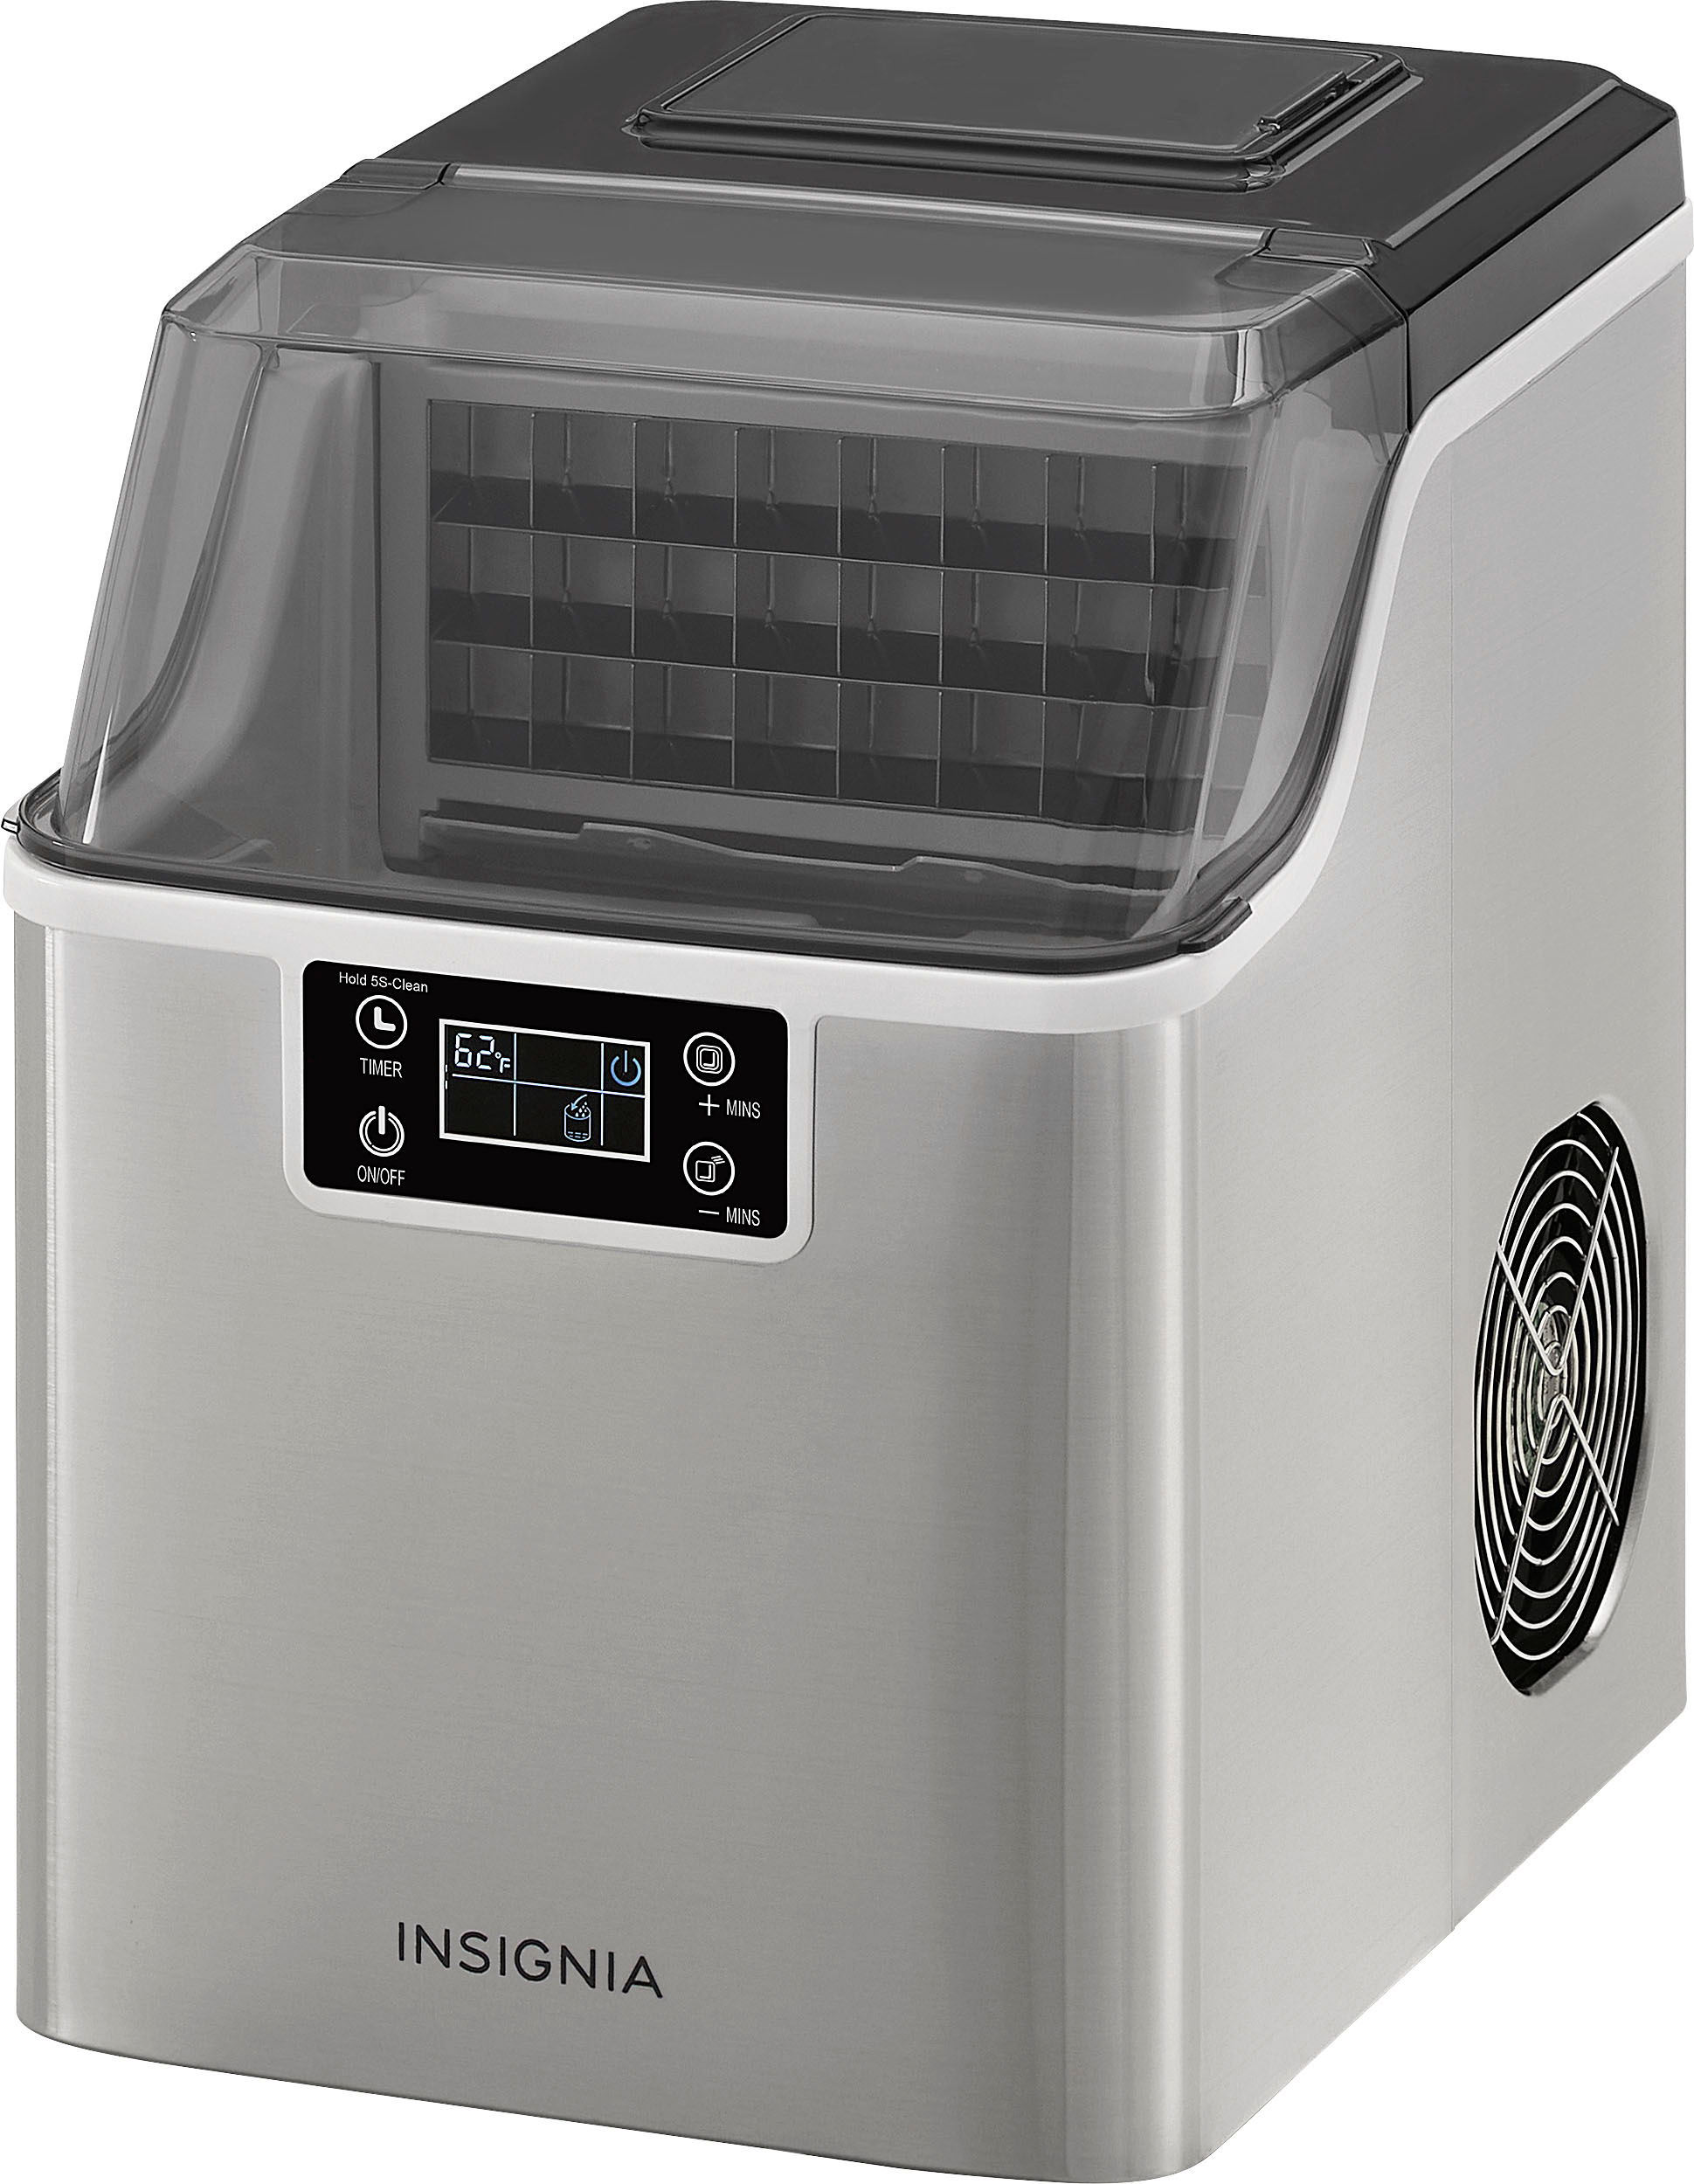 FUNKOL 14.00 in. Ice Production per Day 44 lb. Portable Ice Maker in White  with Two Modes of Large Ice and Small Ice W12644wmq9729 - The Home Depot